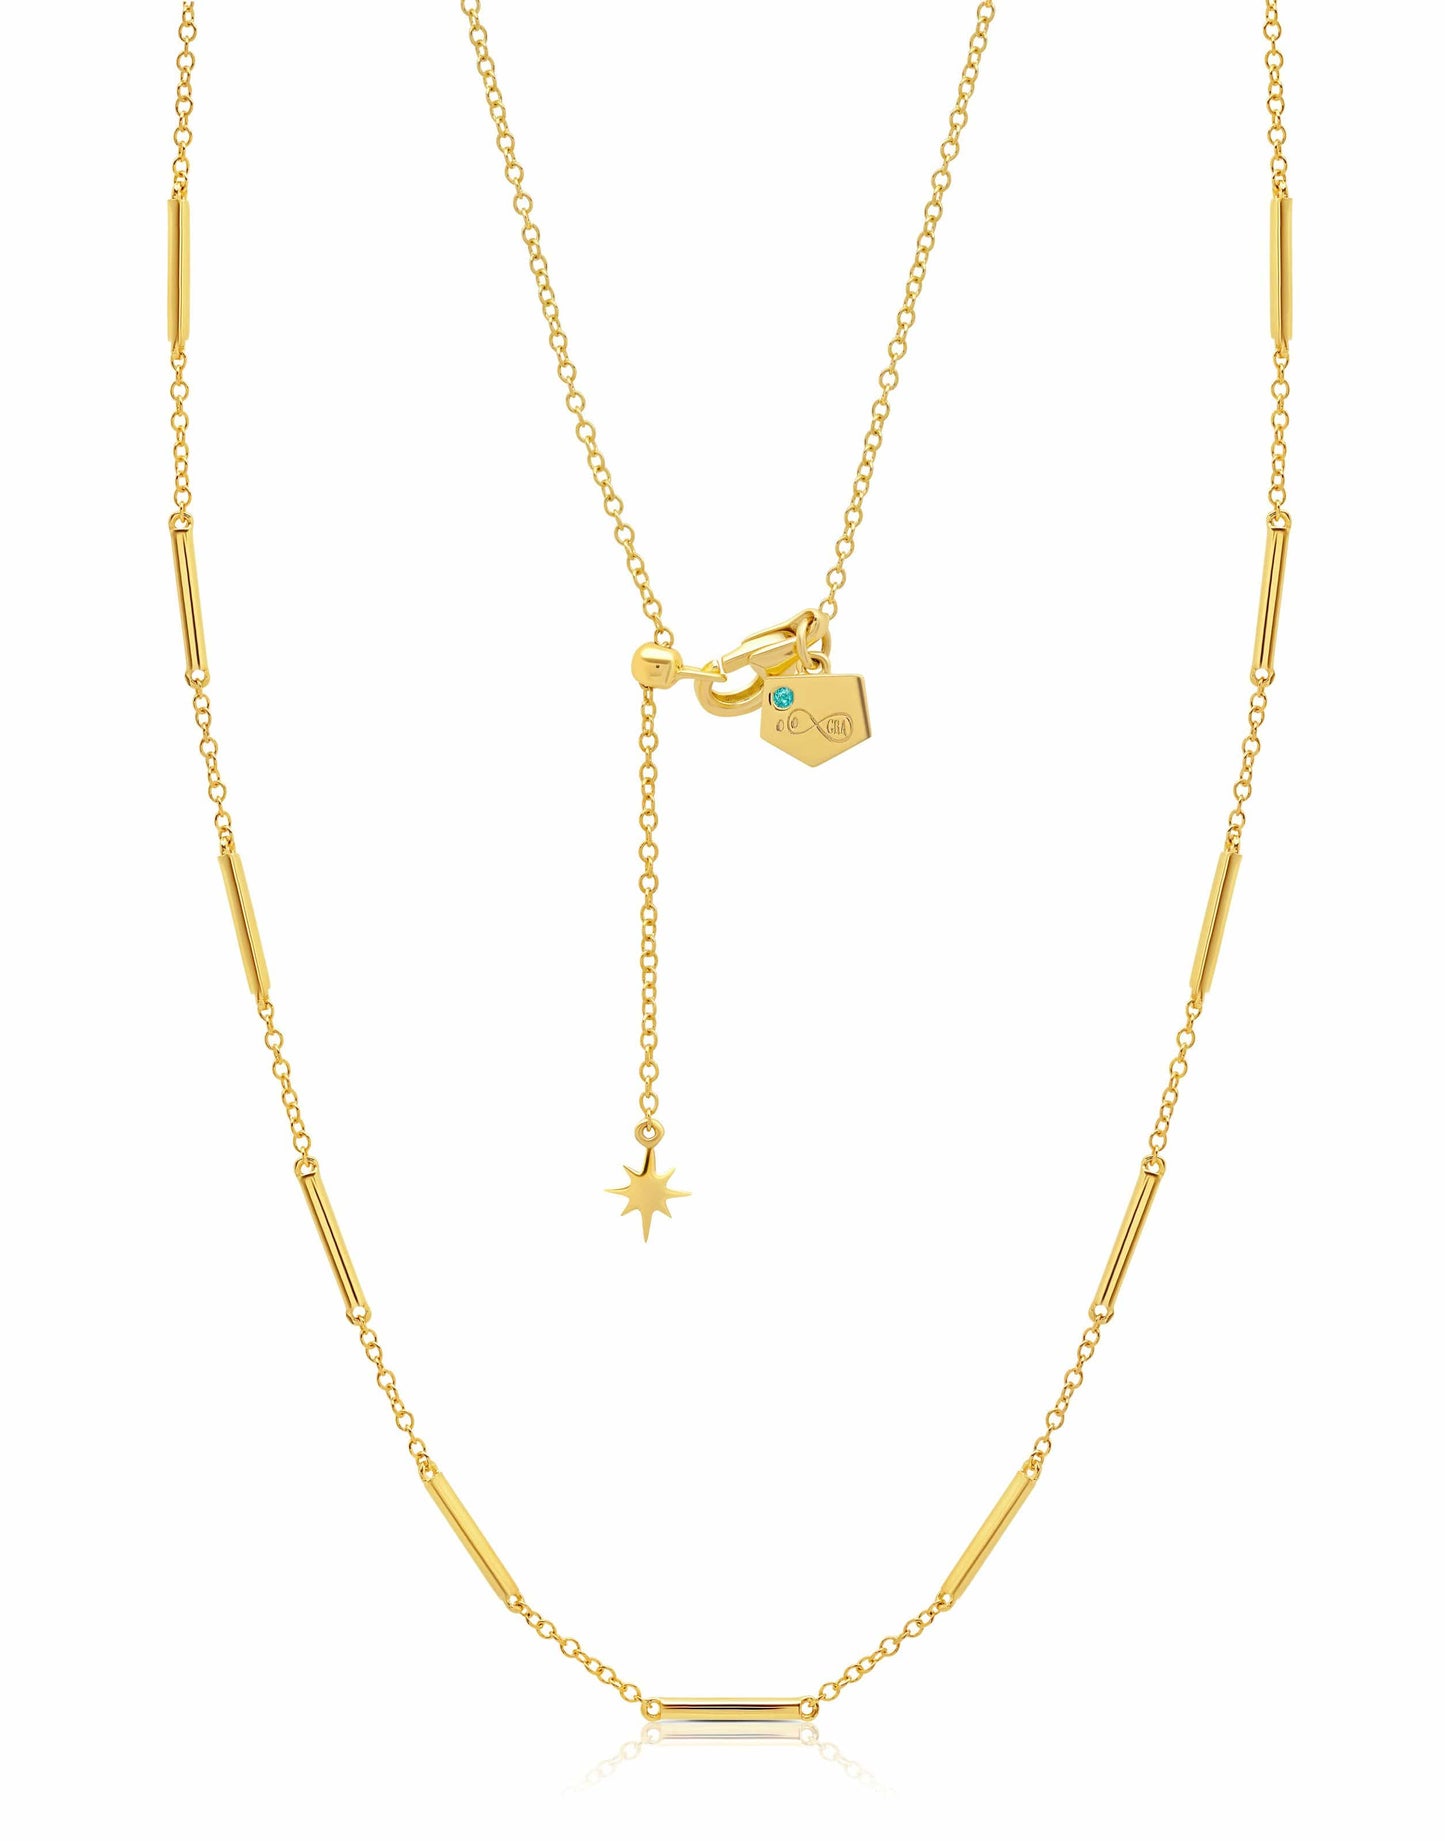 GRAZIELA-Tribal Layering Chain Necklace-YELLOW GOLD